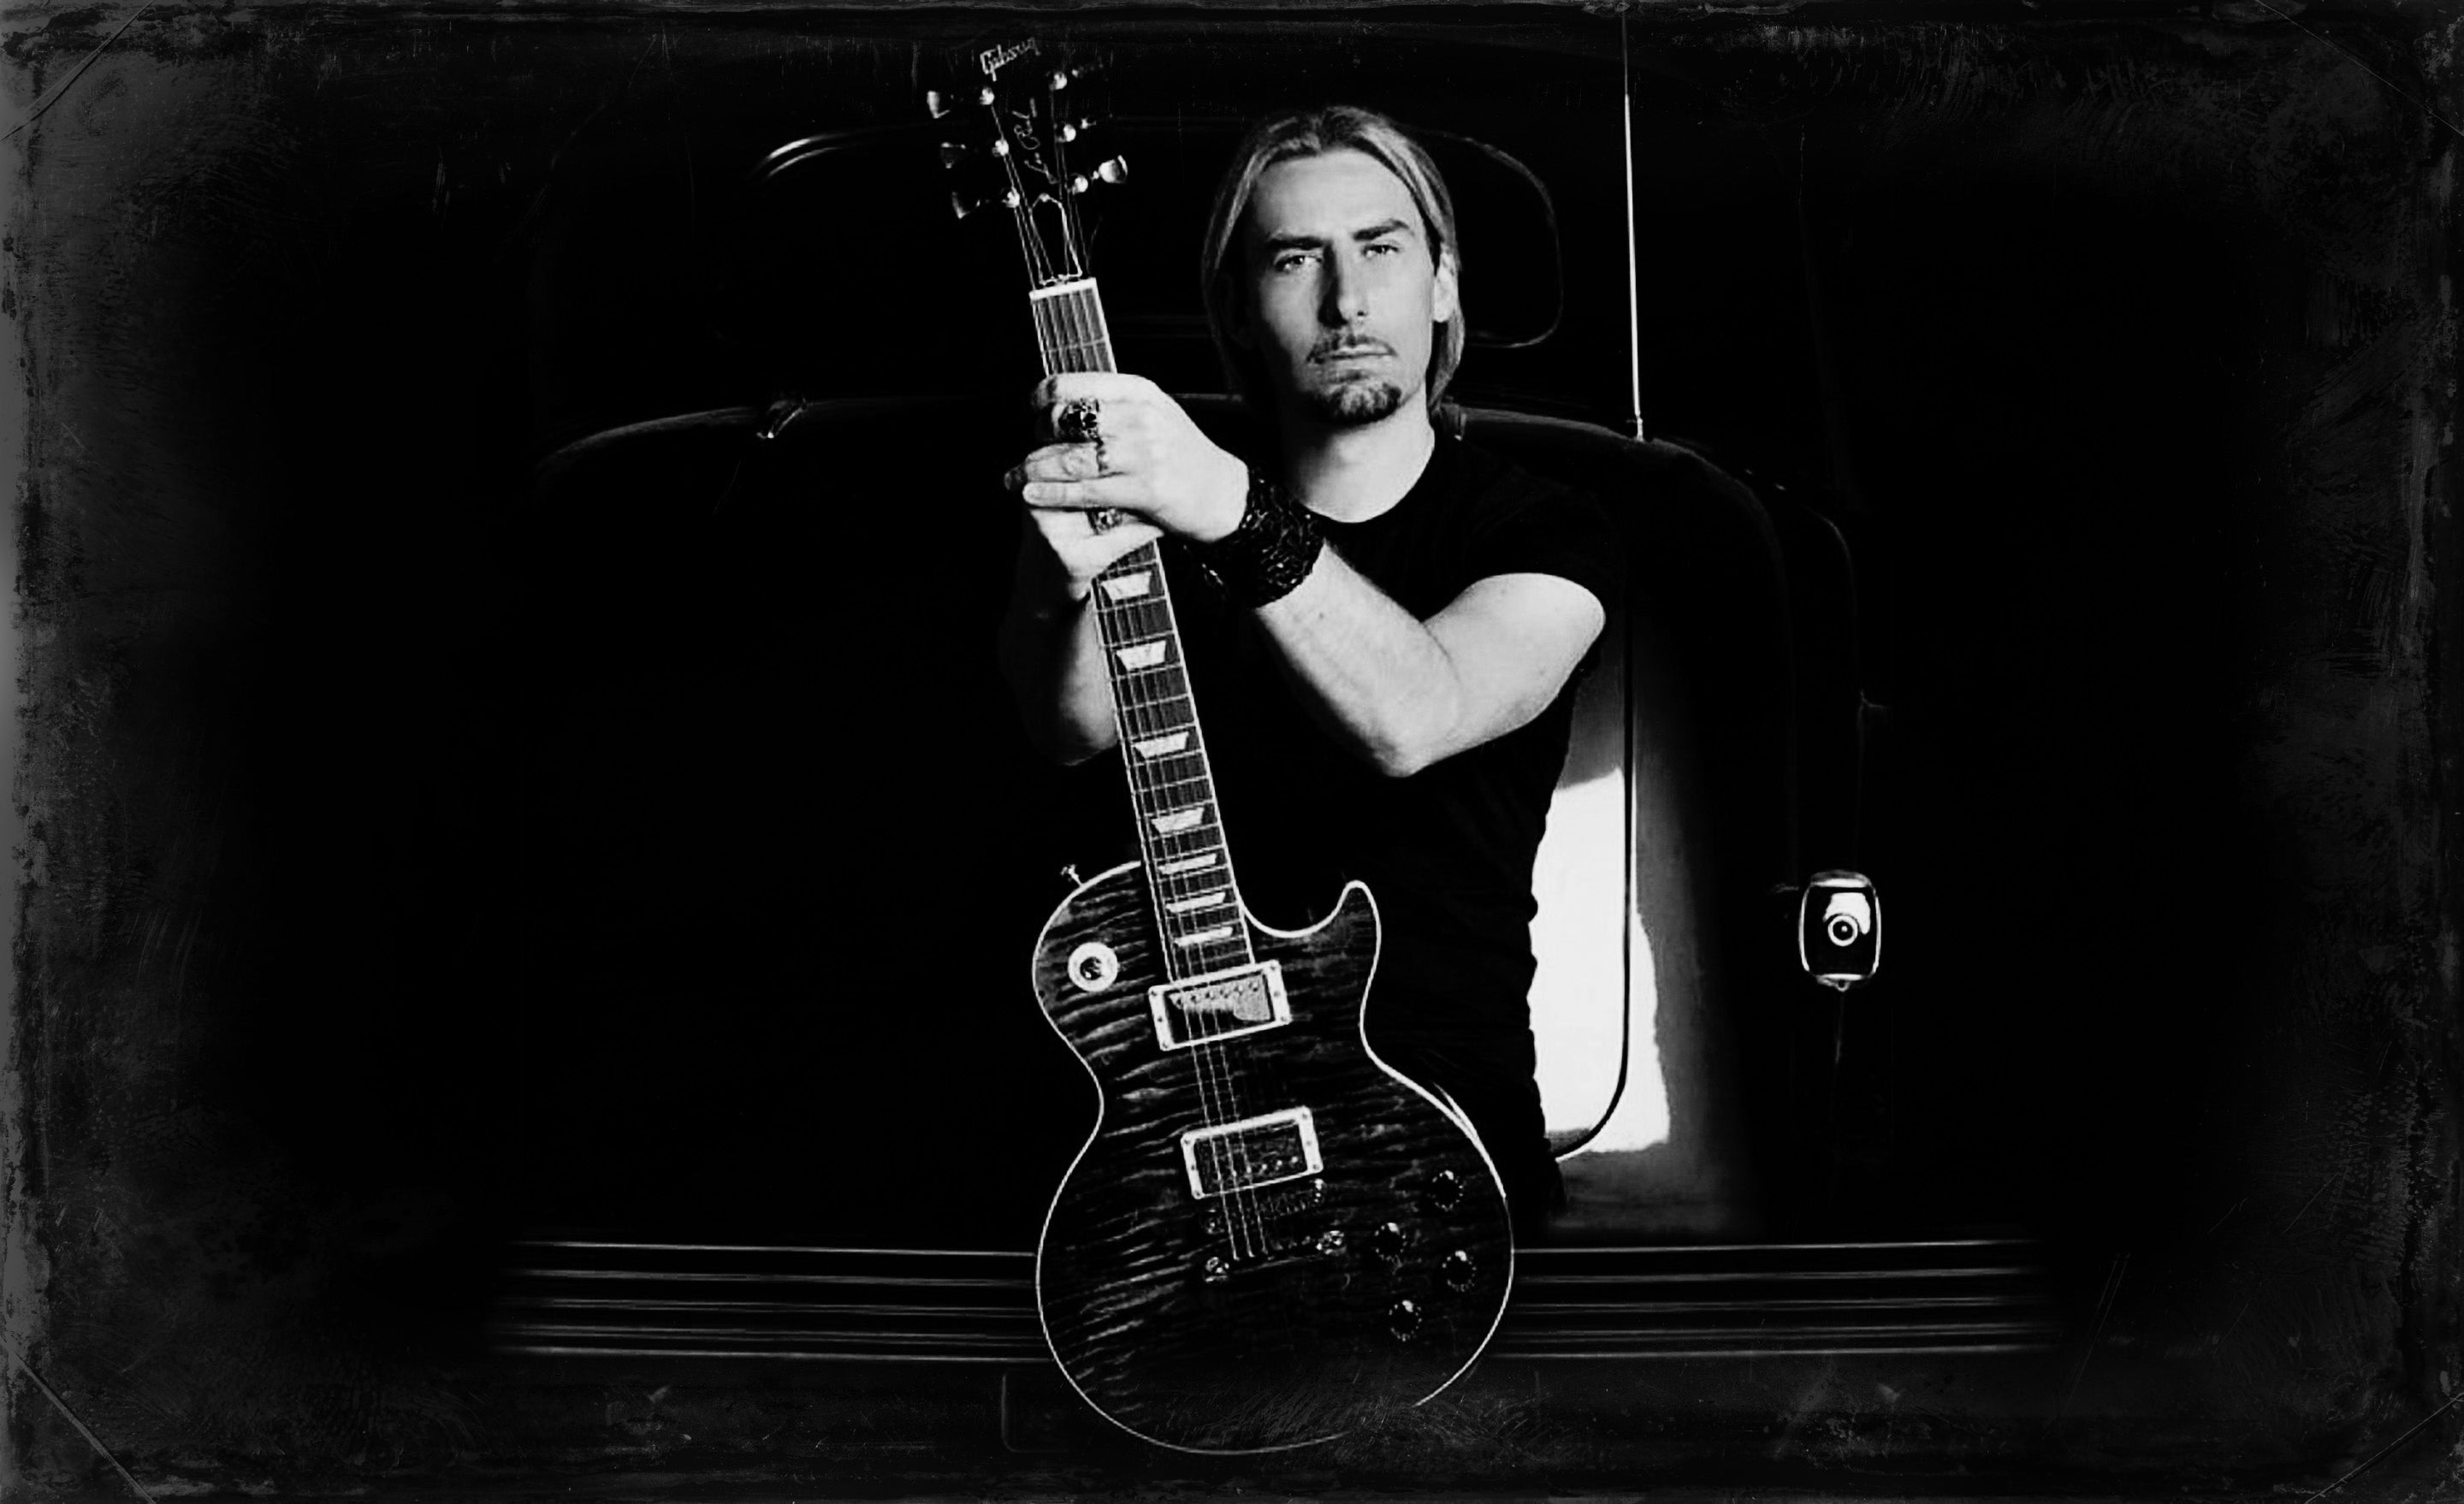 Chad Kroeger portrait in black and white by Mark Maryanovich sitting on back bumper of vintage car holding custom Blackwater Les Paul guitar upright in his lap